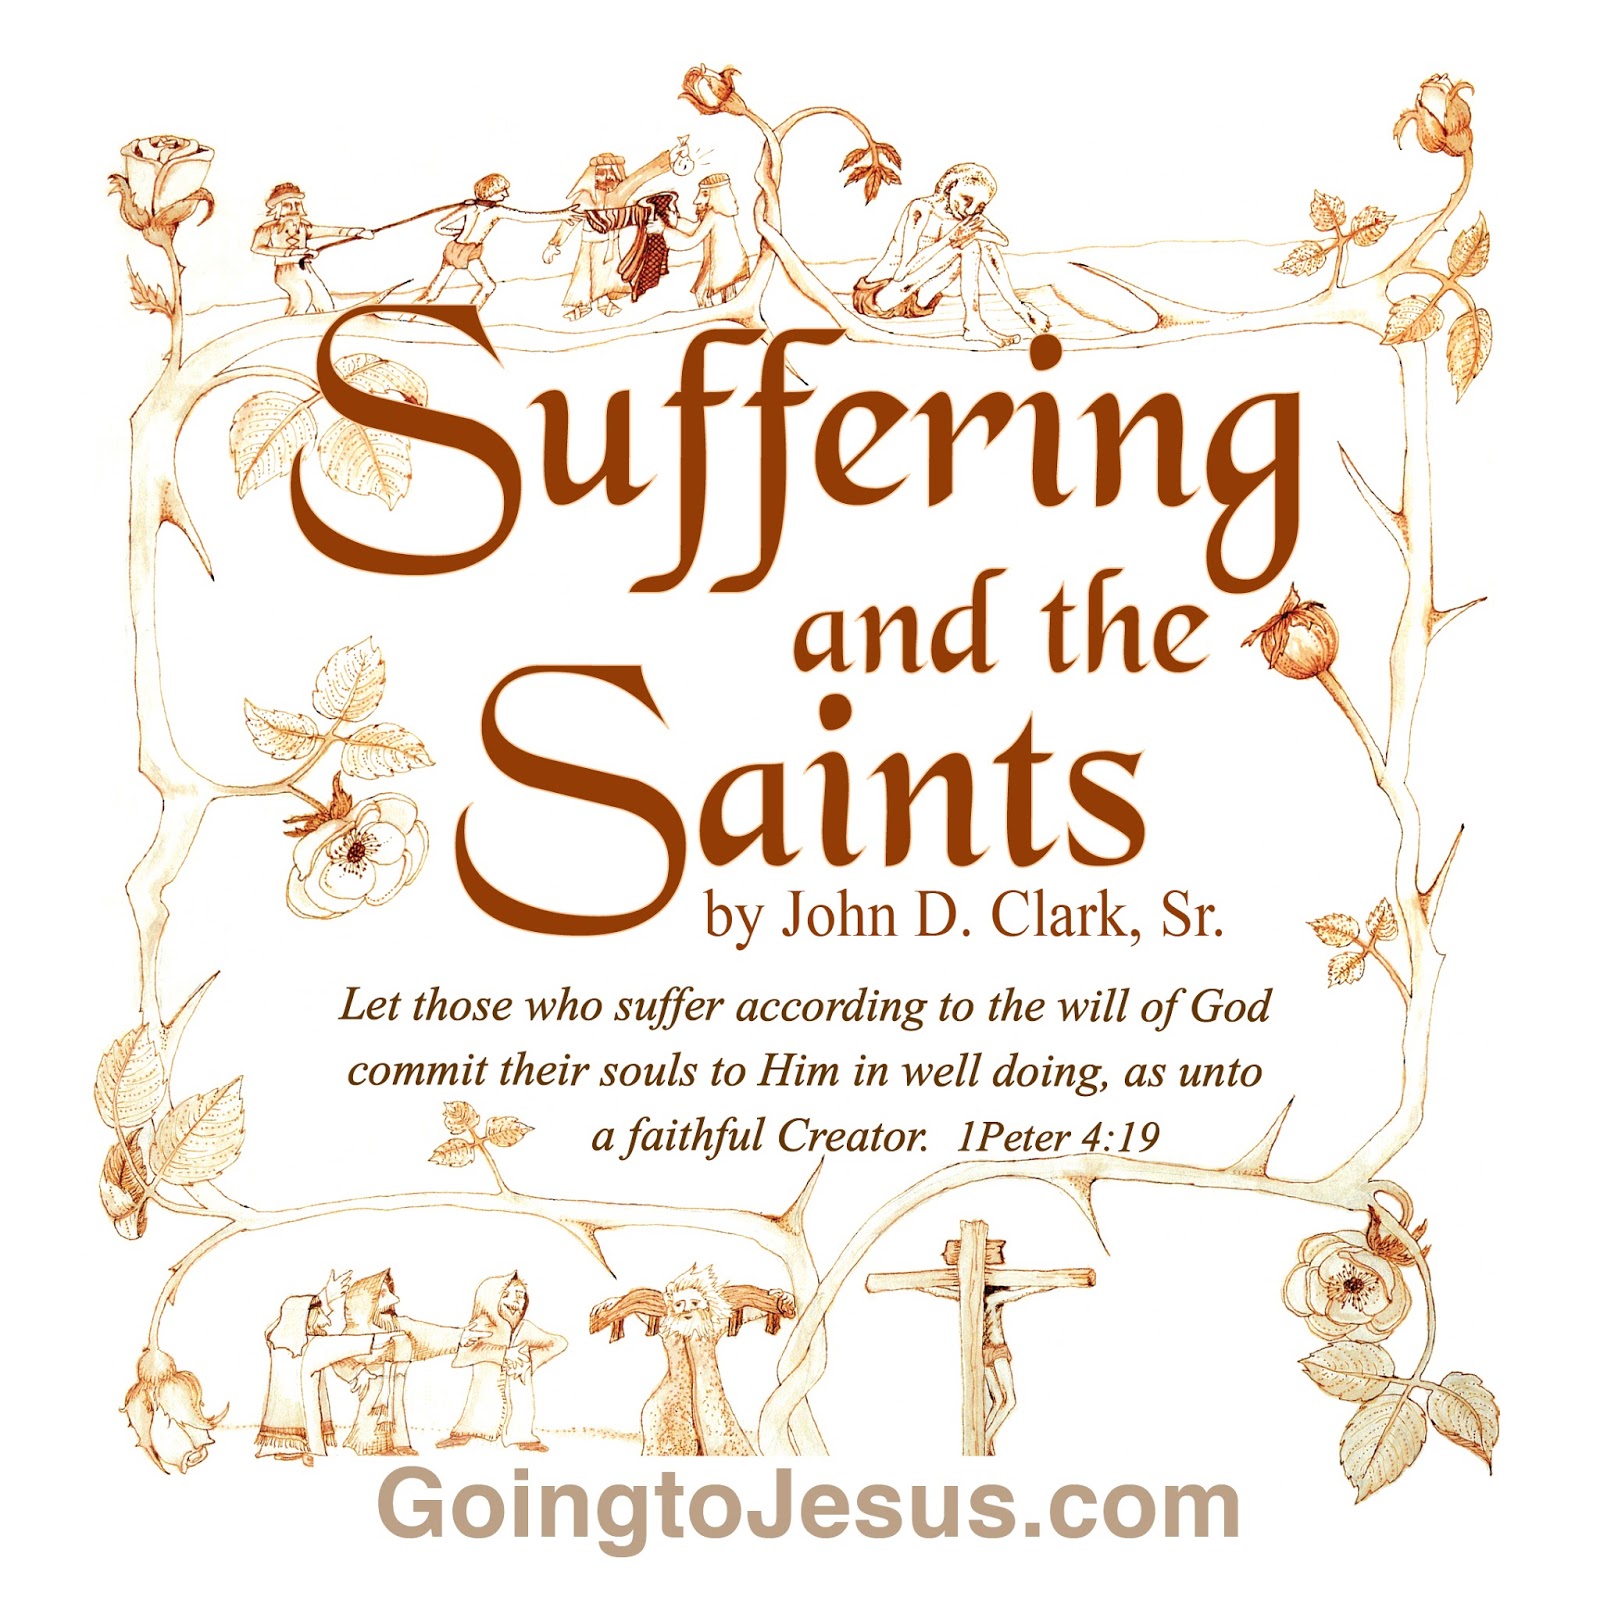 Suffering and the Saints